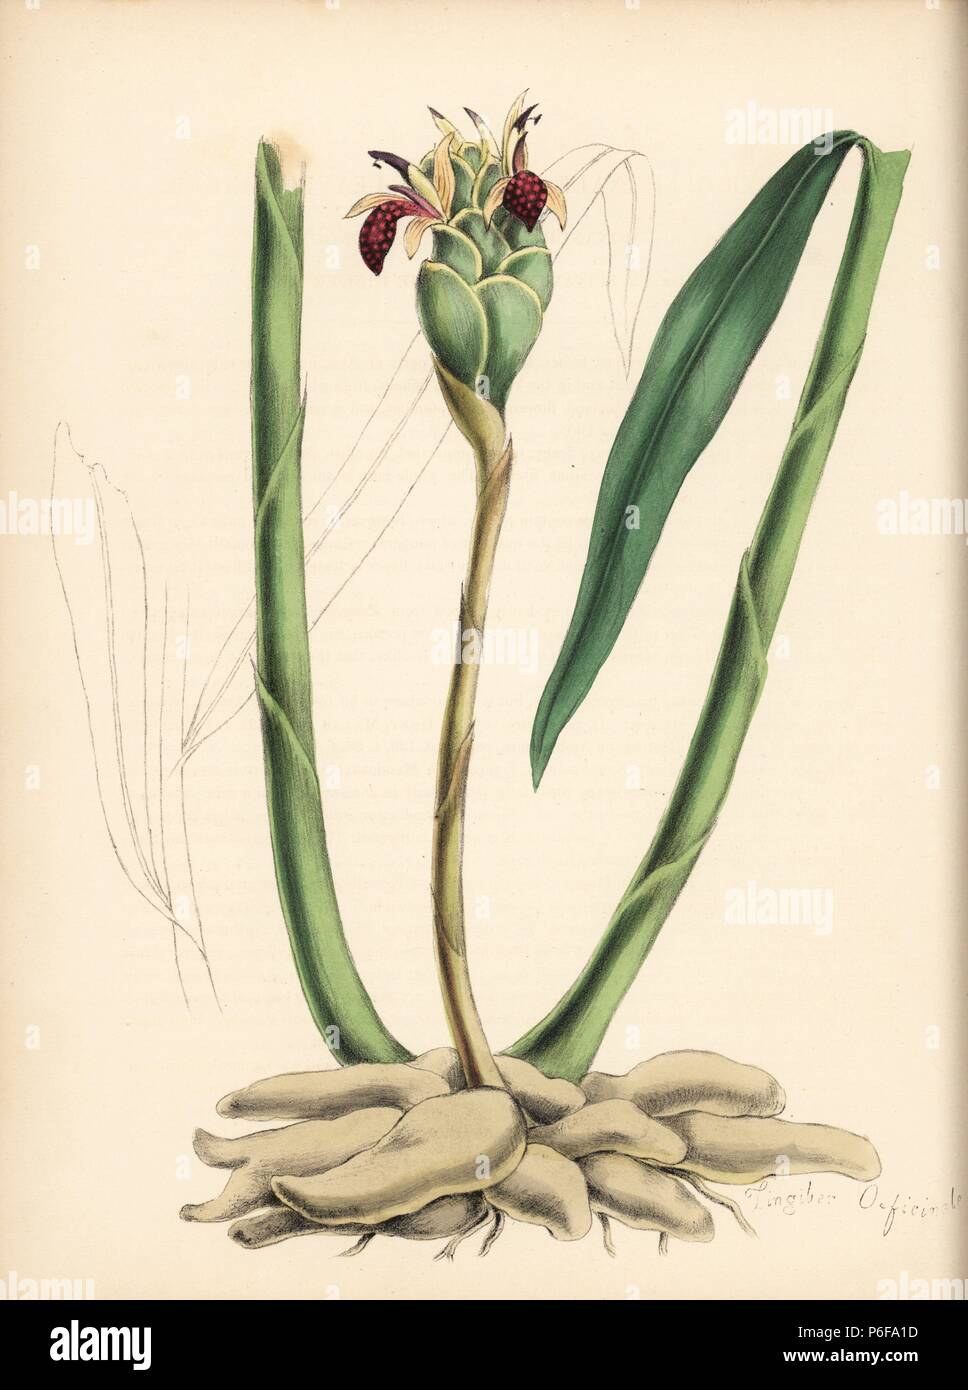 Ginger, Zingiber officinale. Handcoloured zincograph by Chabots drawn by Miss M. A. Burnett from her 'Plantae Utiliores: or Illustrations of Useful Plants,' Whittaker, London, 1842. Miss Burnett drew the botanical illustrations, but the text was chiefly by her late brother, British botanist Gilbert Thomas Burnett (1800-1835). Stock Photo